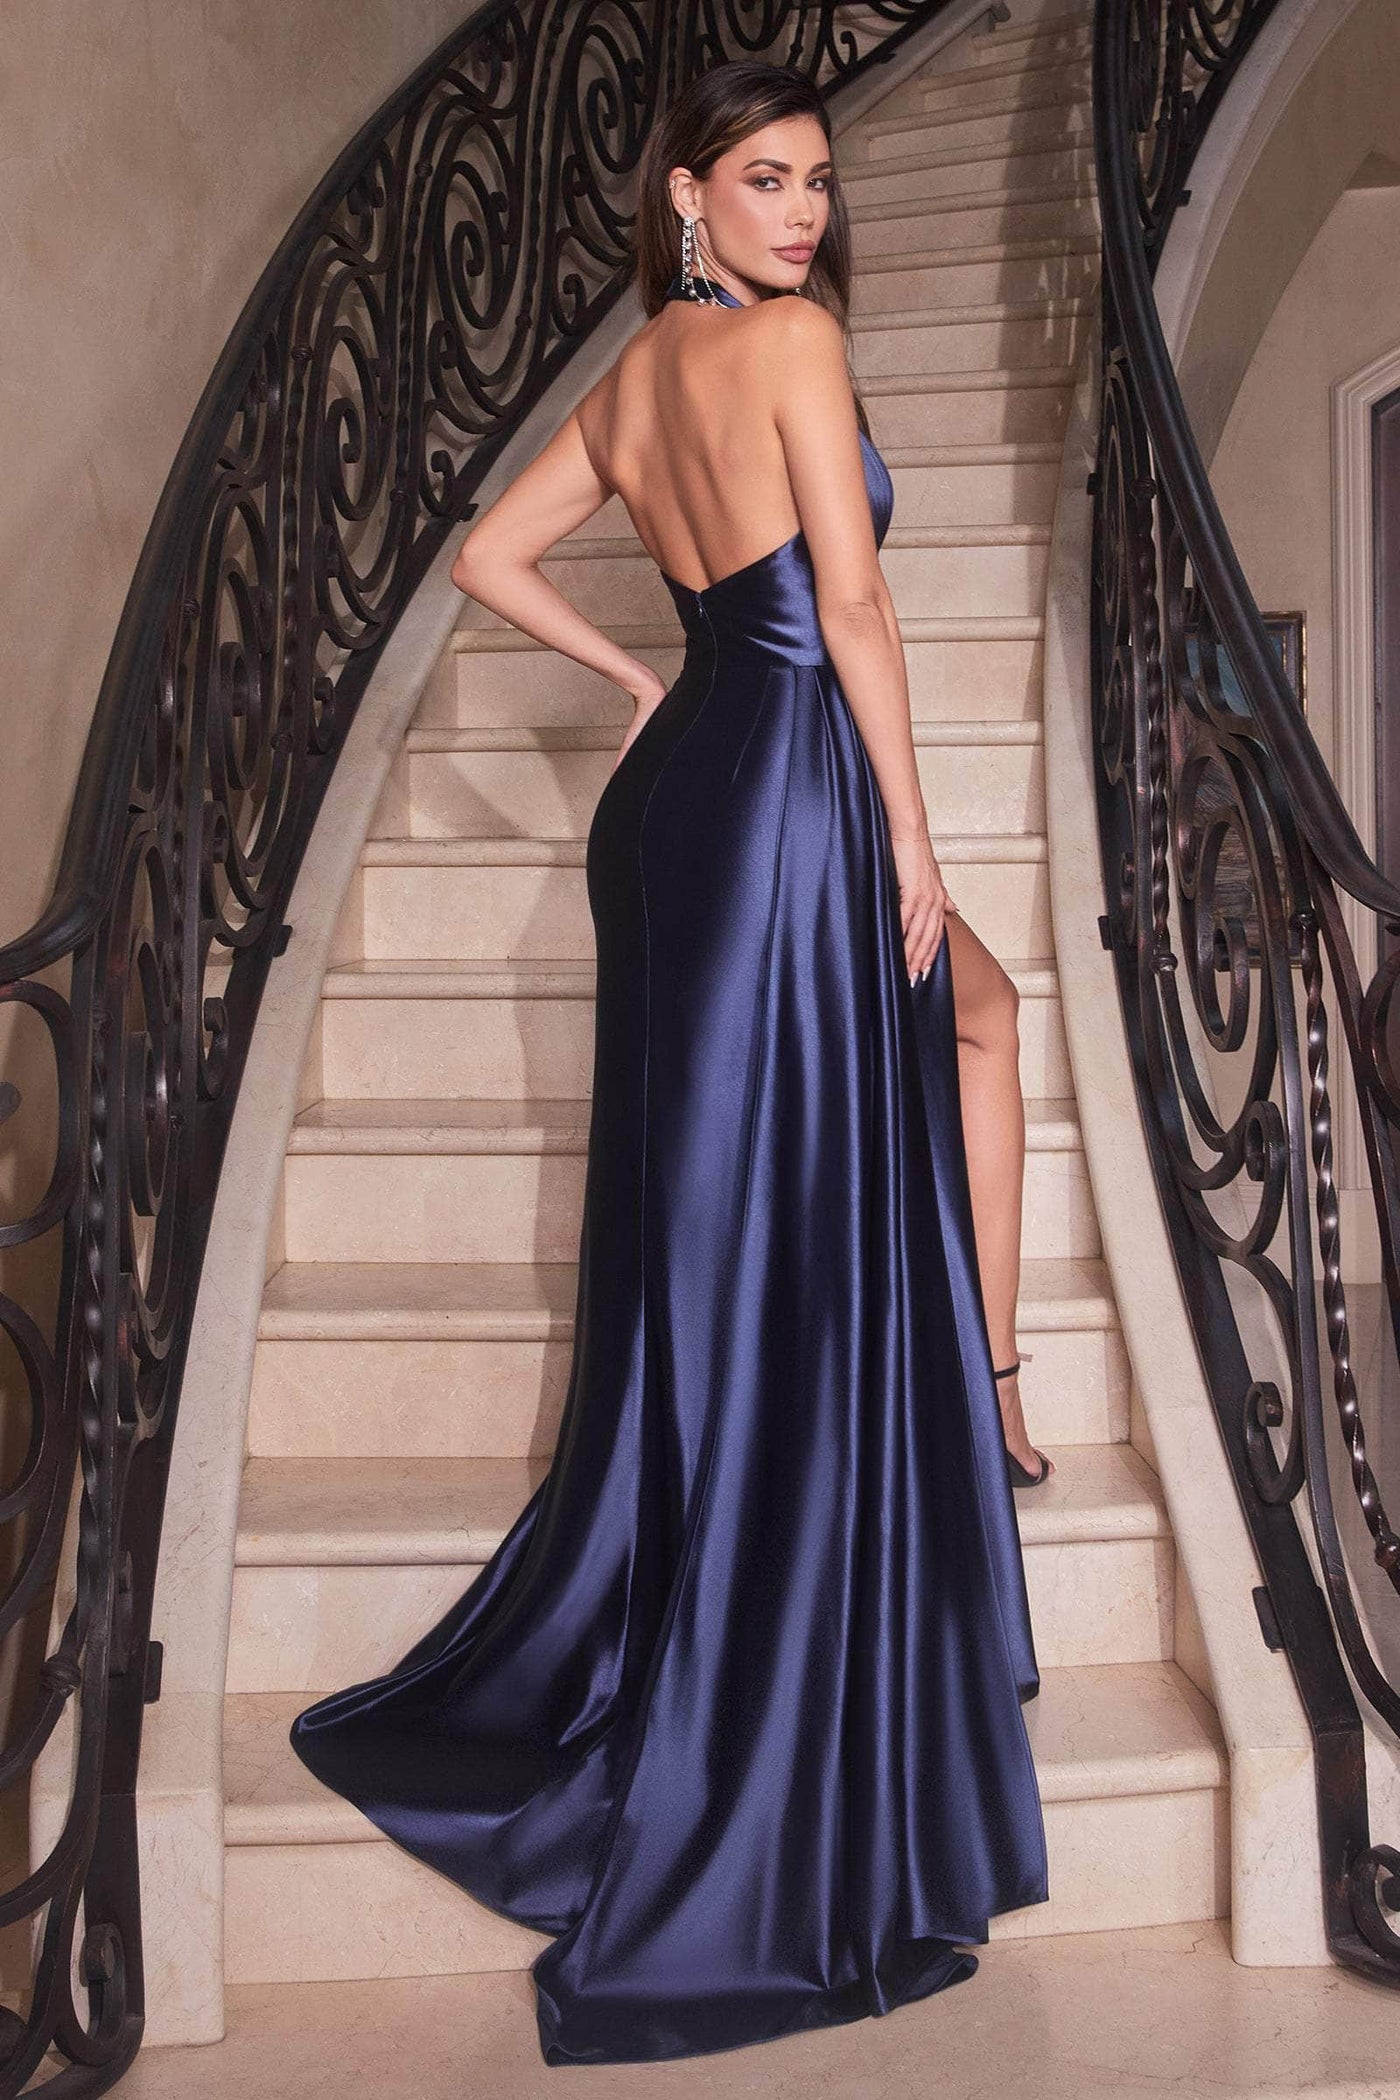 Ladivine CH079 - Plunging Halter Prom Gown Special Occasion Dress